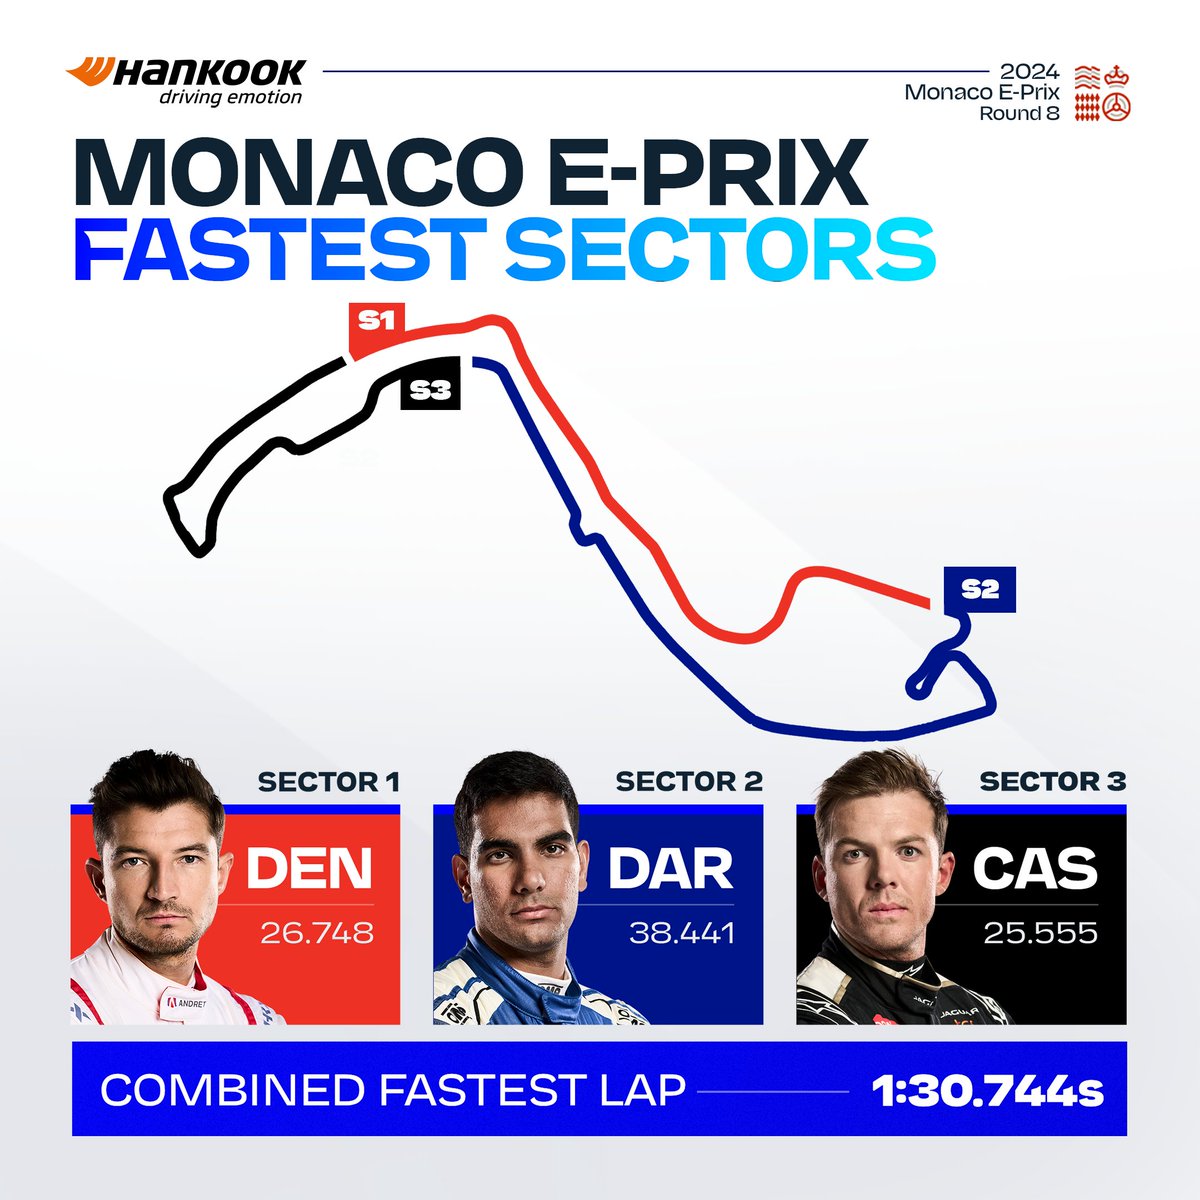 Mastering the streets of Monaco is no mean feat 🫡 Jake Dennis, Jehan Daruvala and Nick Cassidy led the way with the @Hankook_Sport fastest sectors at the #MonacoEPrix!